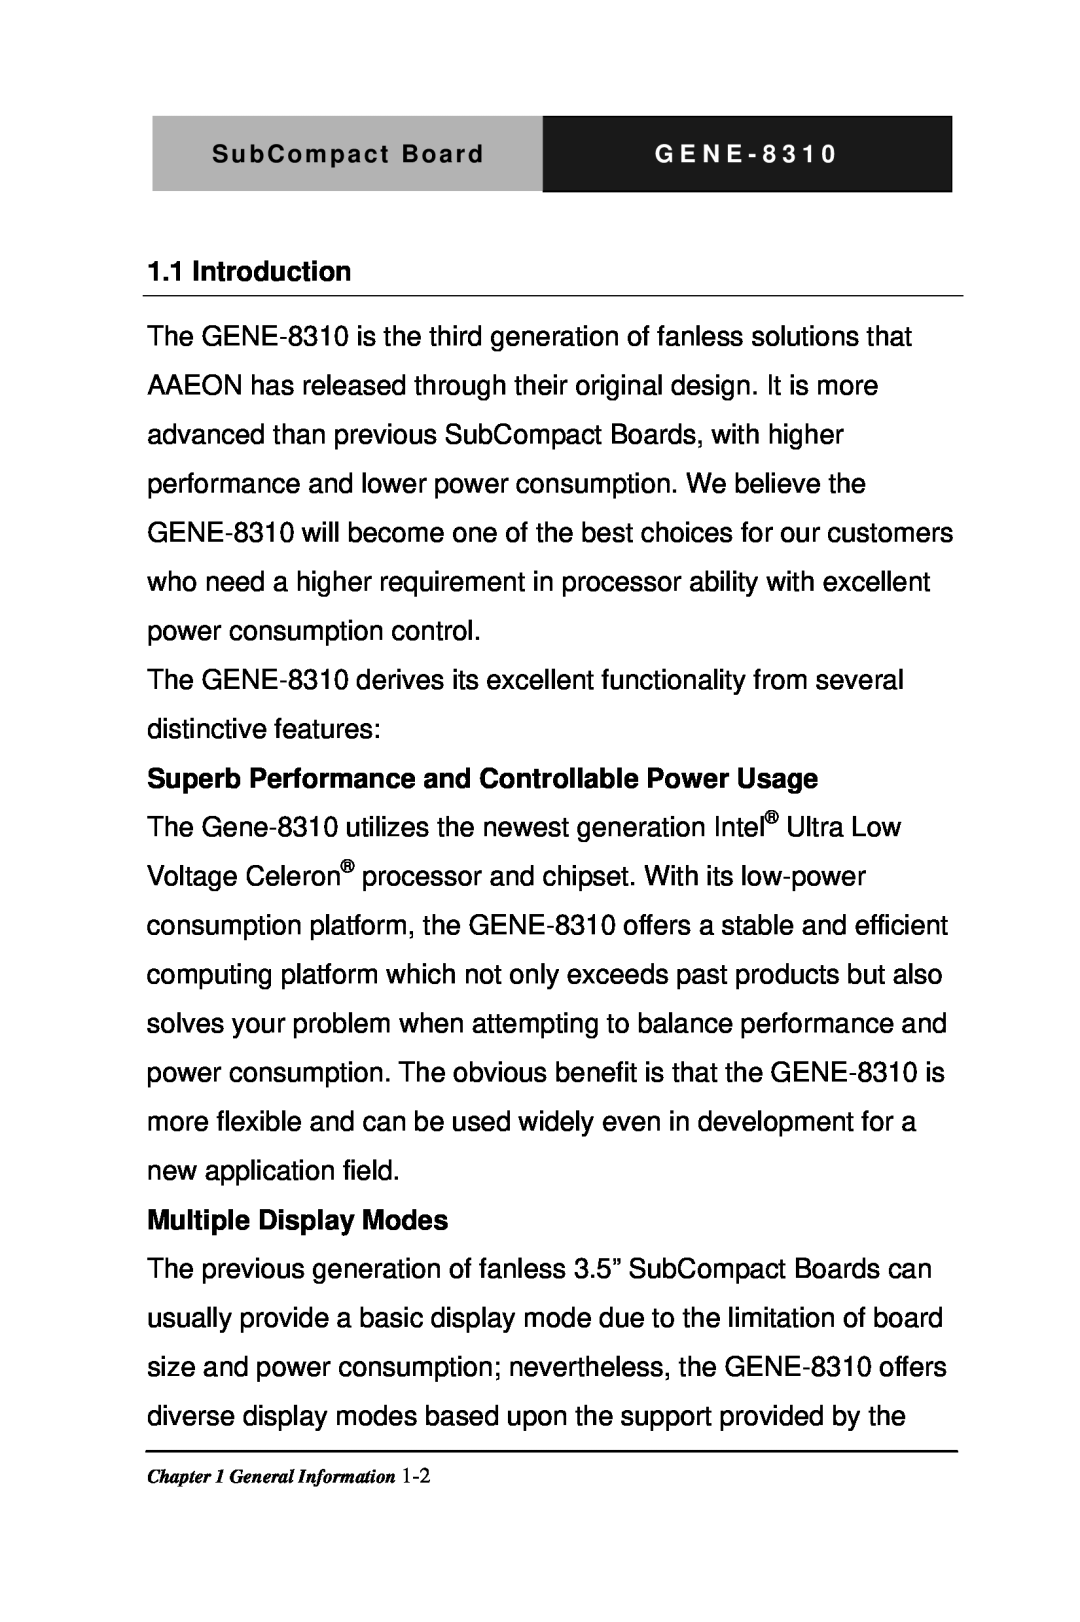 Intel GENE-8310 Introduction, Superb Performance and Controllable Power Usage, Multiple Display Modes, General Information 